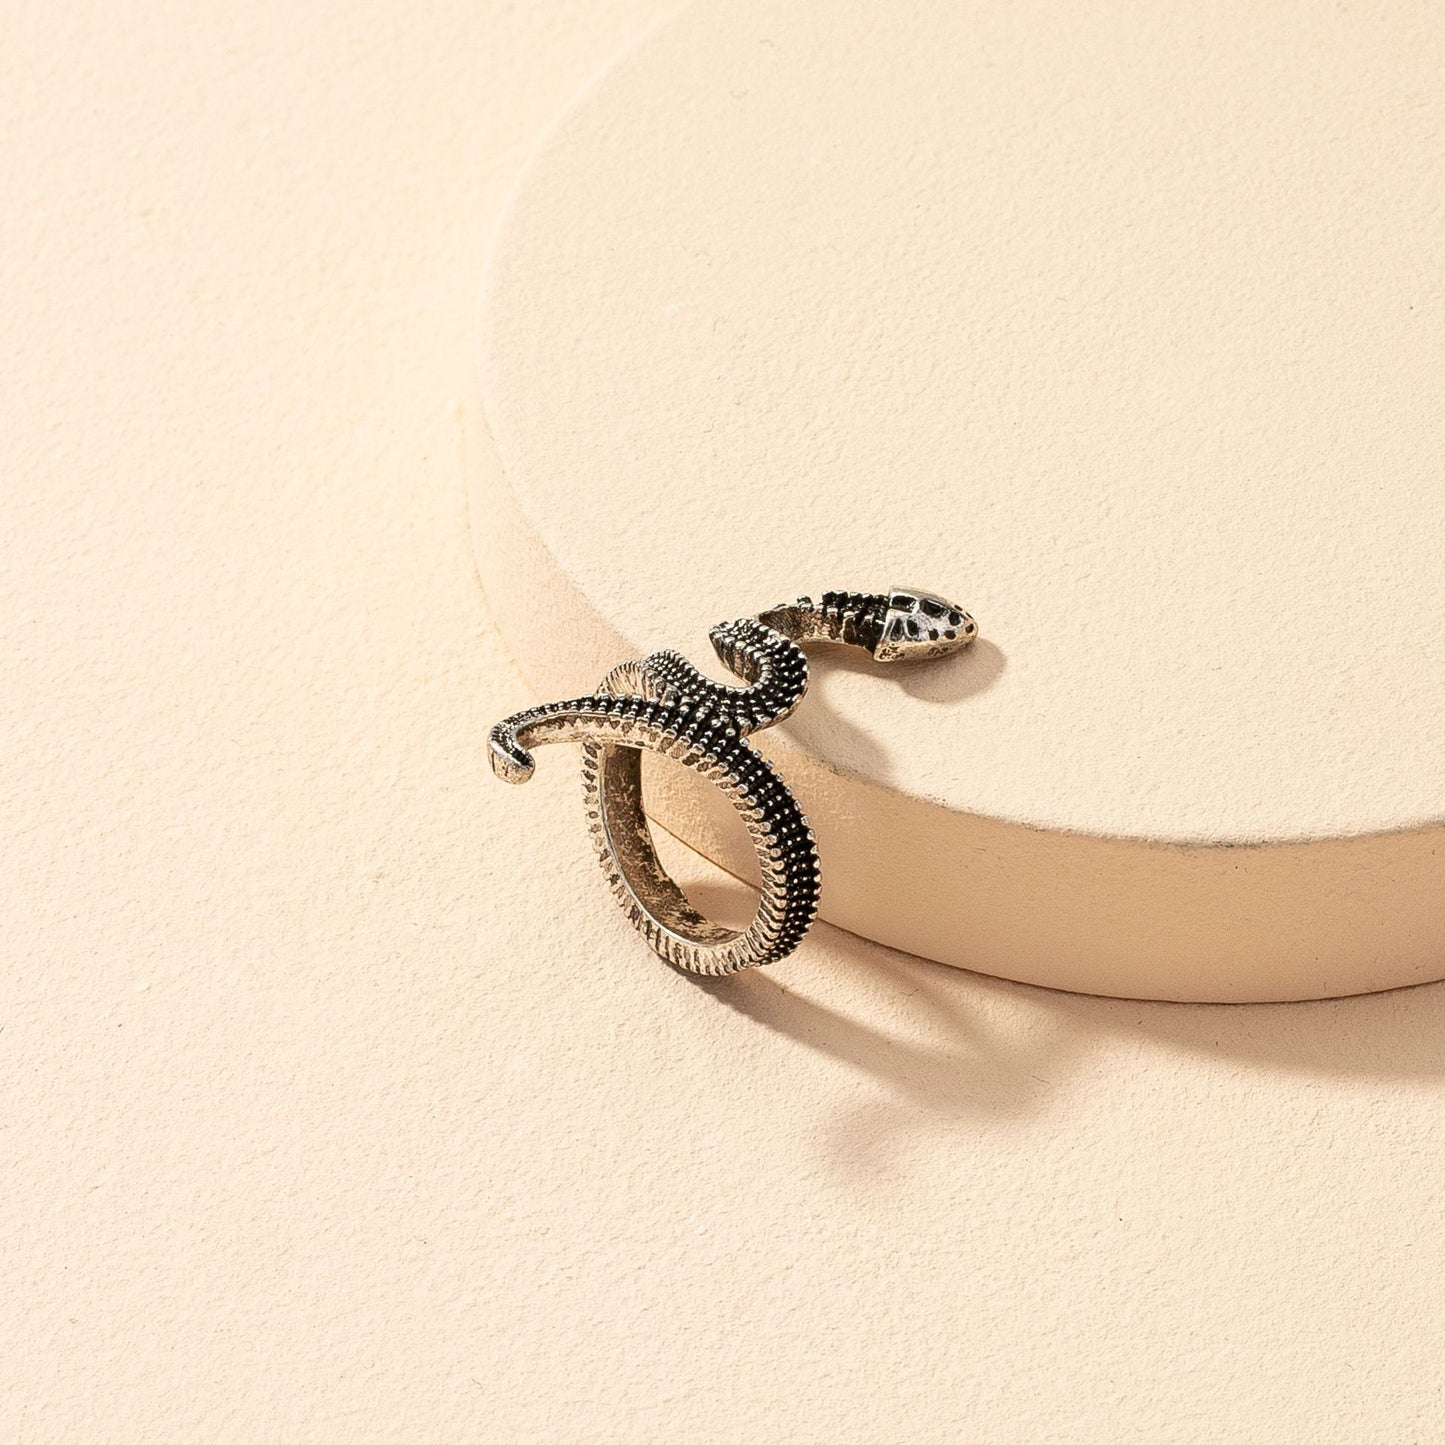 Vintage Snake Statement Ring - Exquisite Handcrafted European Chic